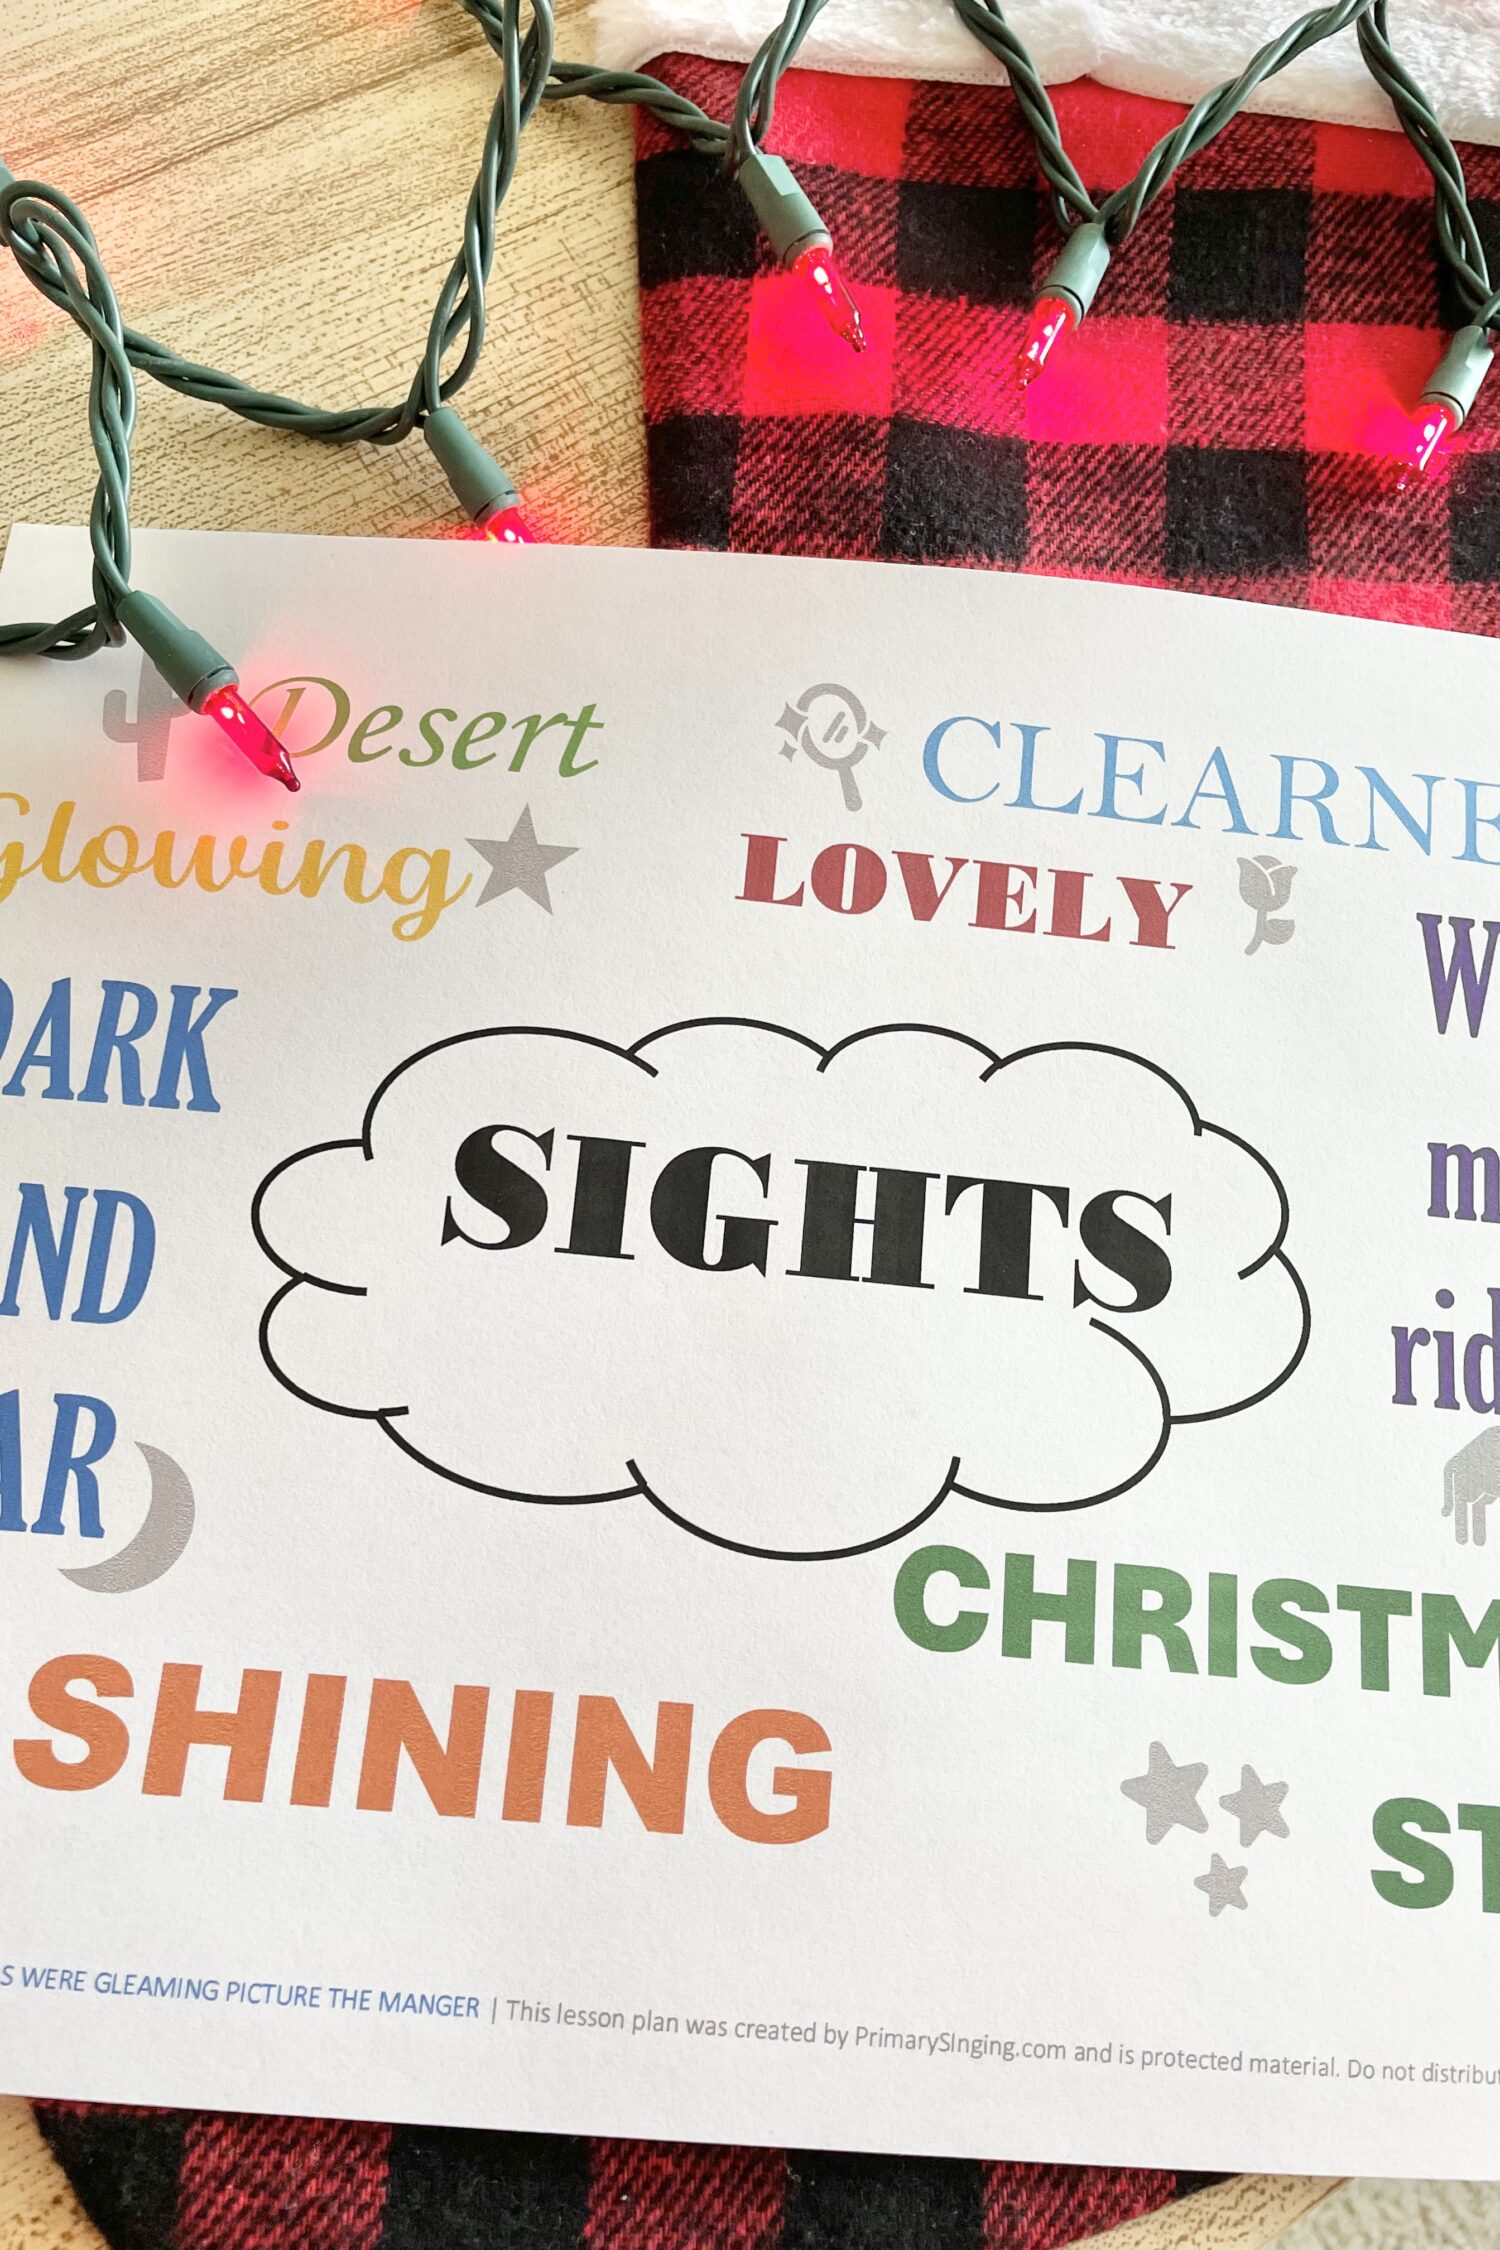 Stars Were Gleaming Picture the Manger - Bring this Christmas song to life with the sights & sounds described in this song with printable song helps for LDS Primary Music Leaders.